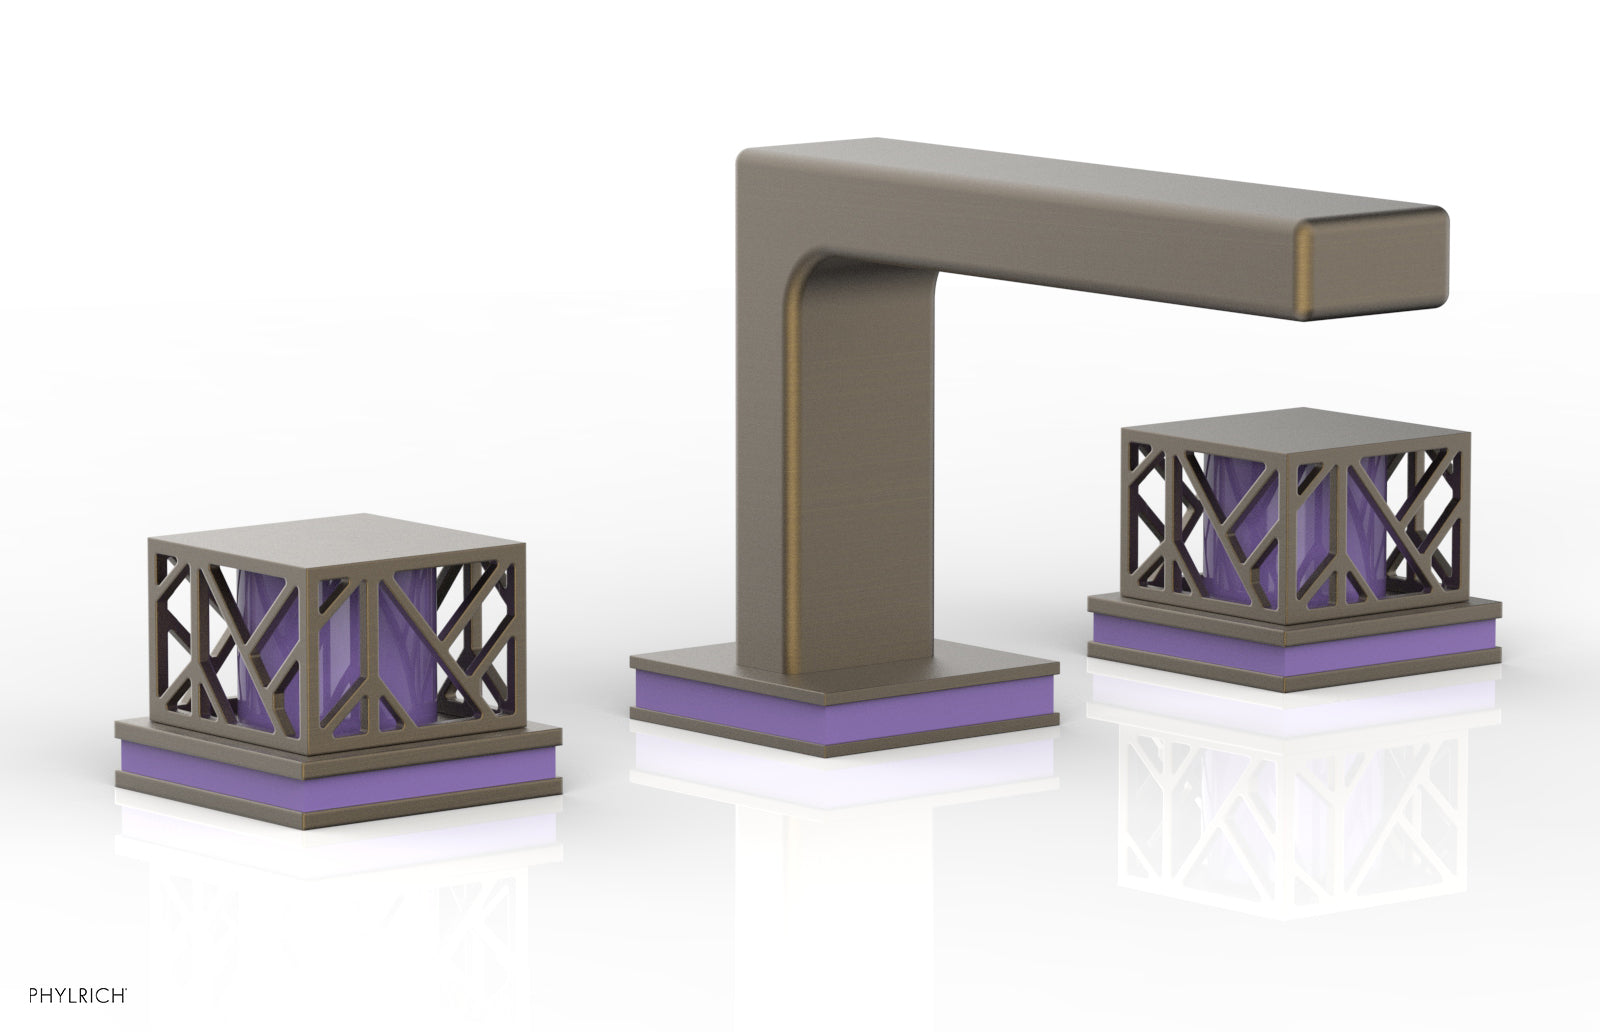 Phylrich JOLIE Widespread Faucet - Square Handles with "Purple" Accents